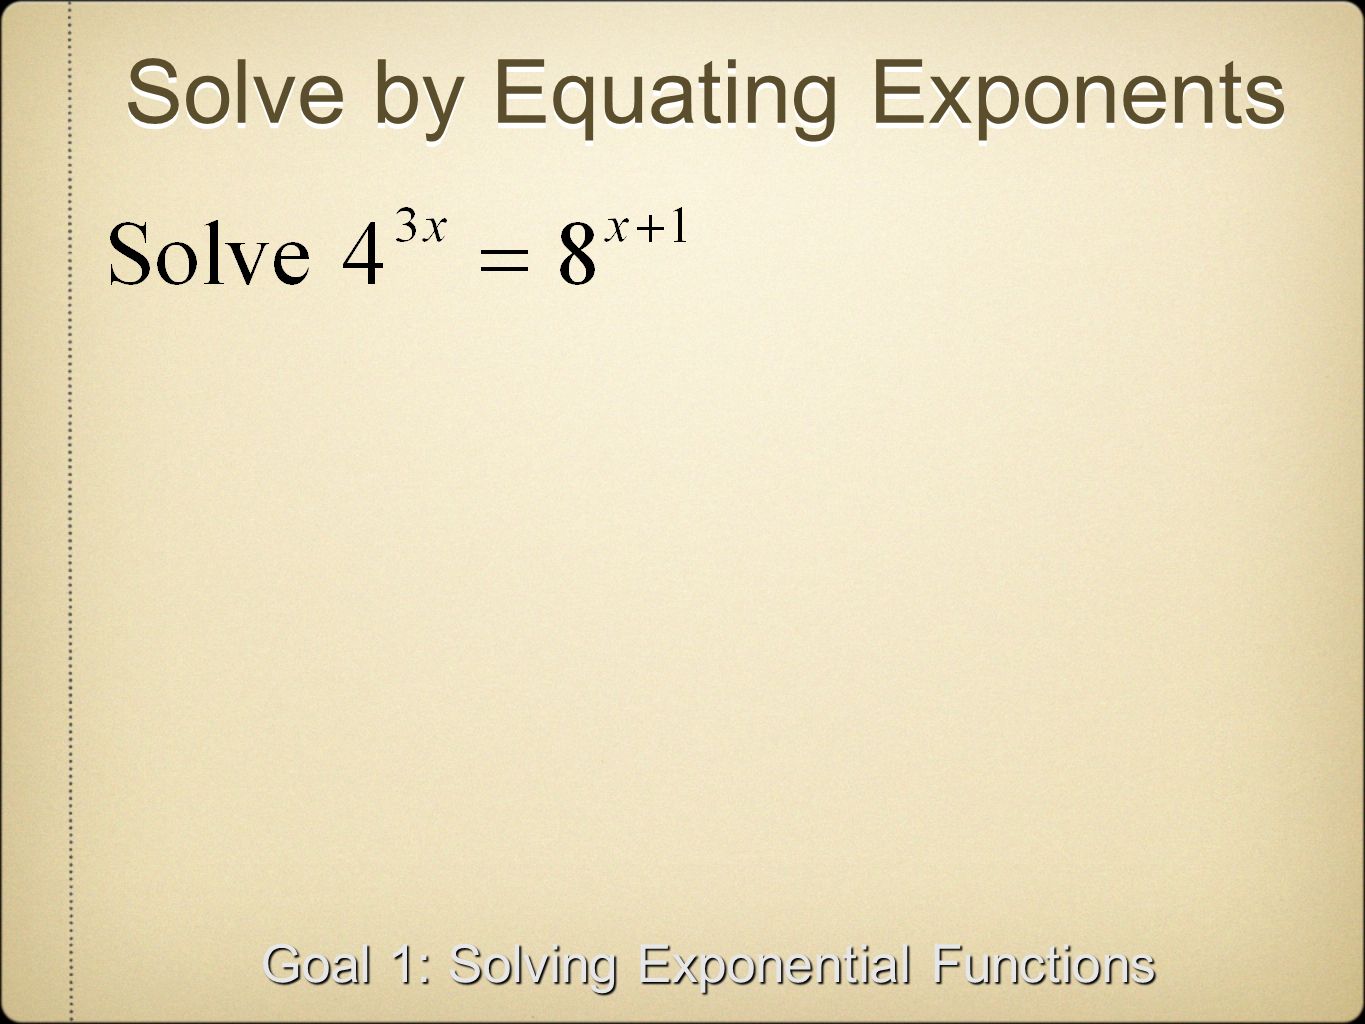 Solve by Equating Exponents Goal 1: Solving Exponential Functions